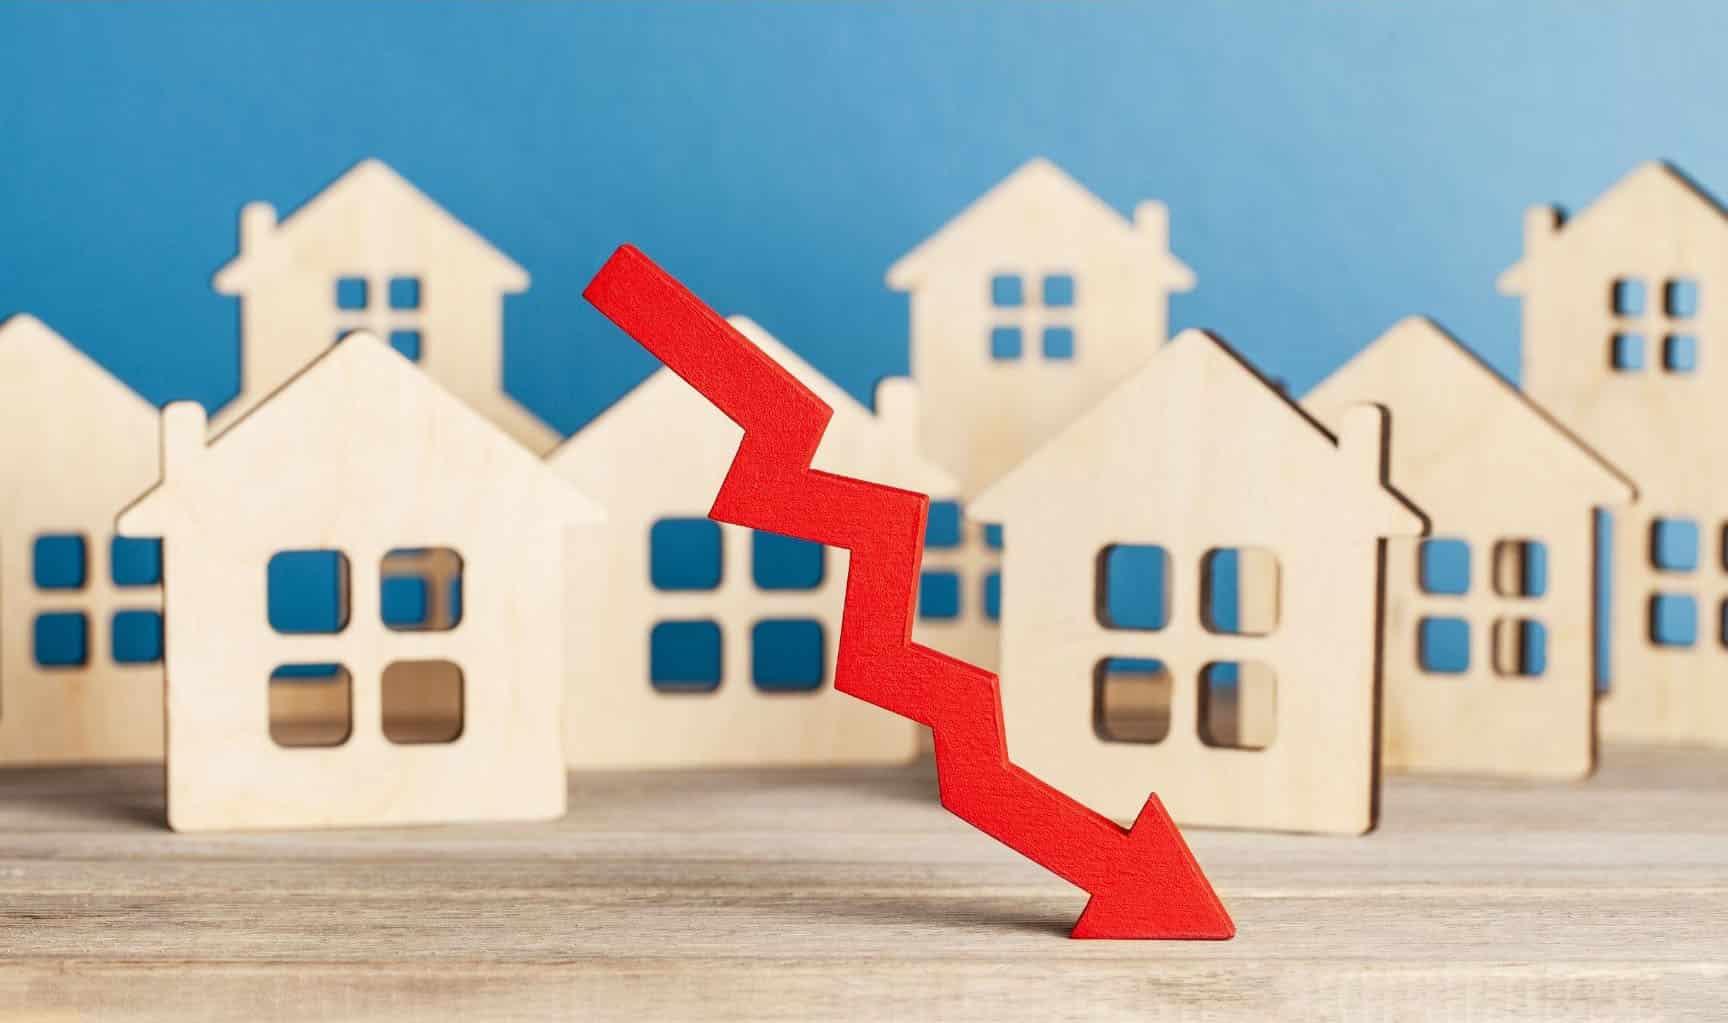 When is the housing market going to crash?